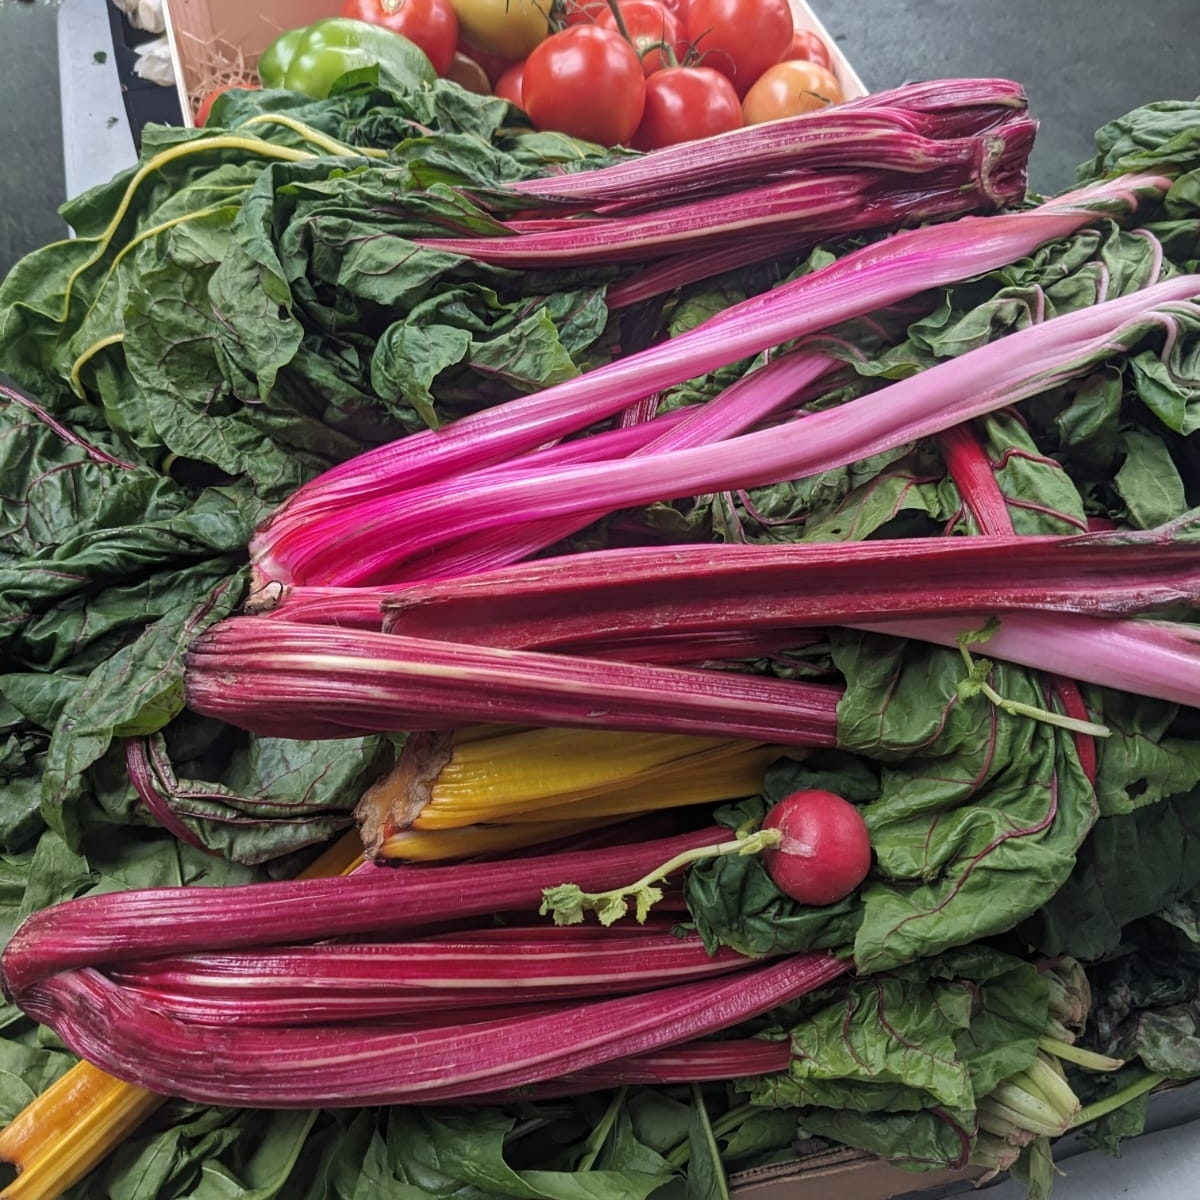 🌈 Delicious rainbow chard rescued from a recent surplus food collection @boroughmarket! 🌈 Huge thank you to all the traders at Borough Market who donate incredible surplus food to our collections! Are you a business with surplus food to donate? DM us to learn how we can help.